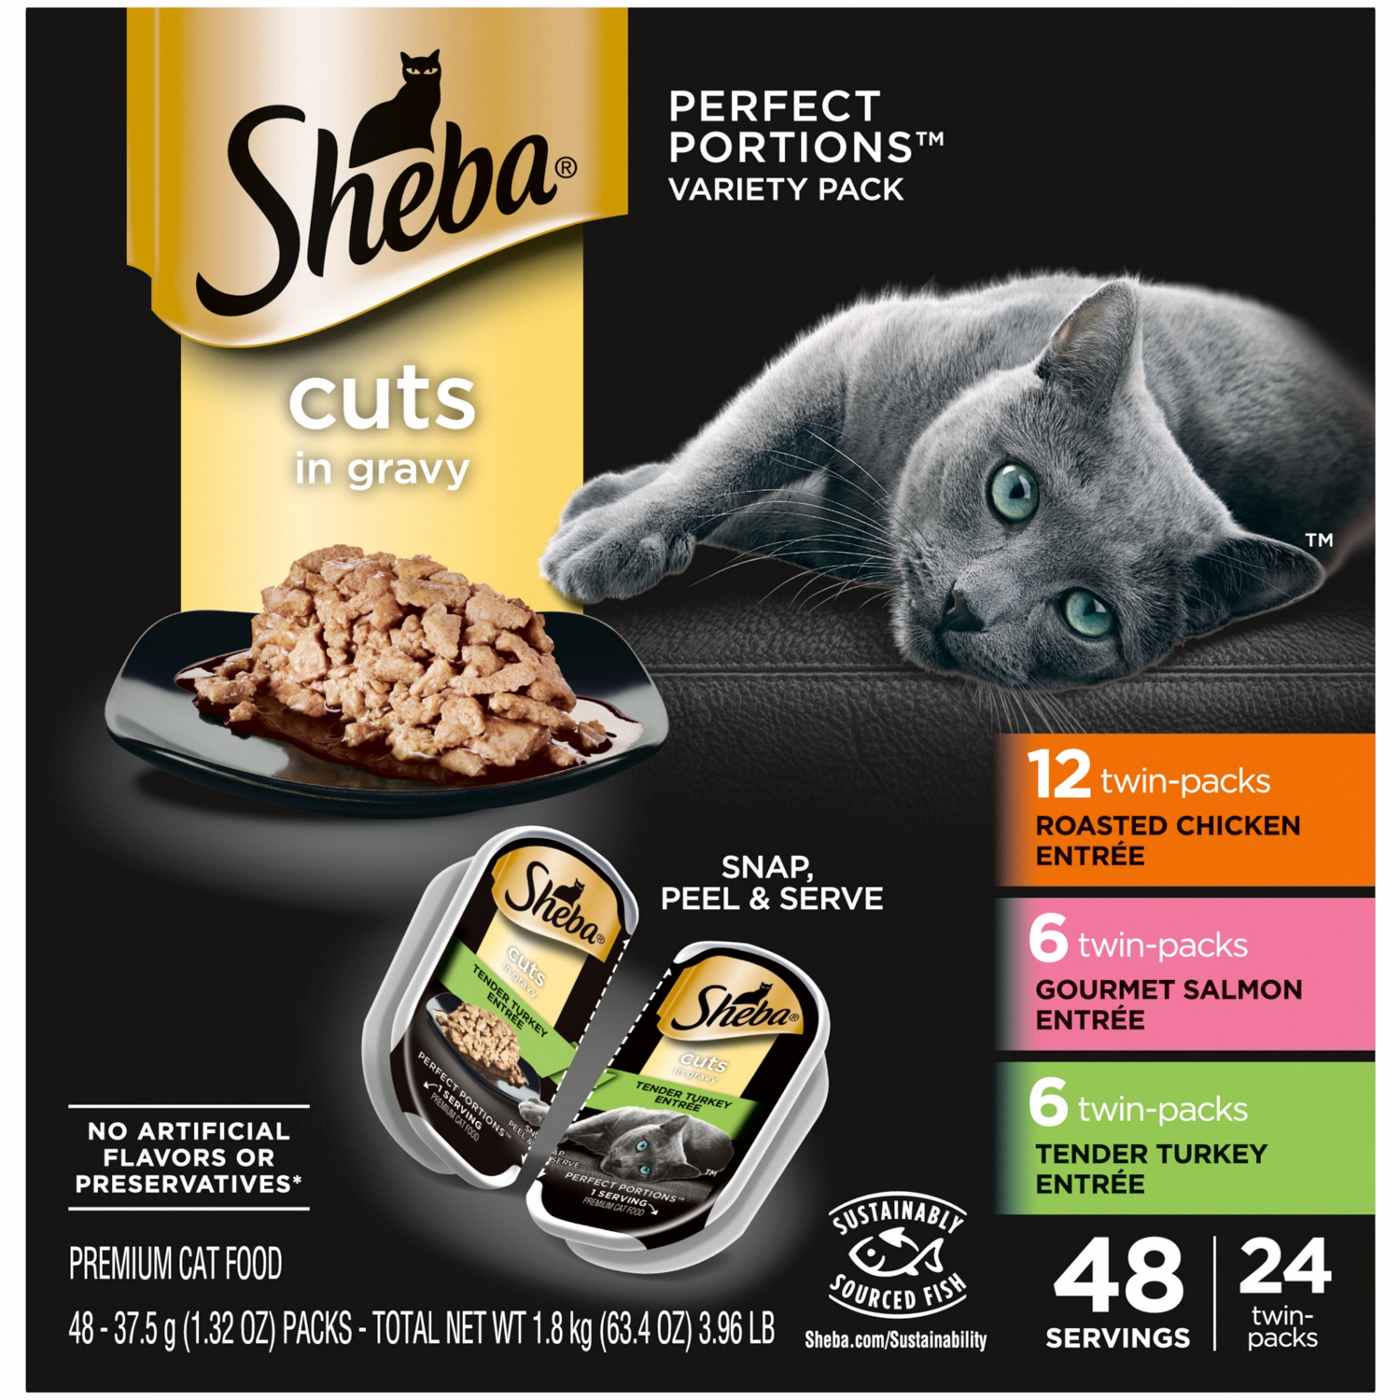 Sheba Perfect Portions Multipack Cuts In Gravy; image 1 of 2